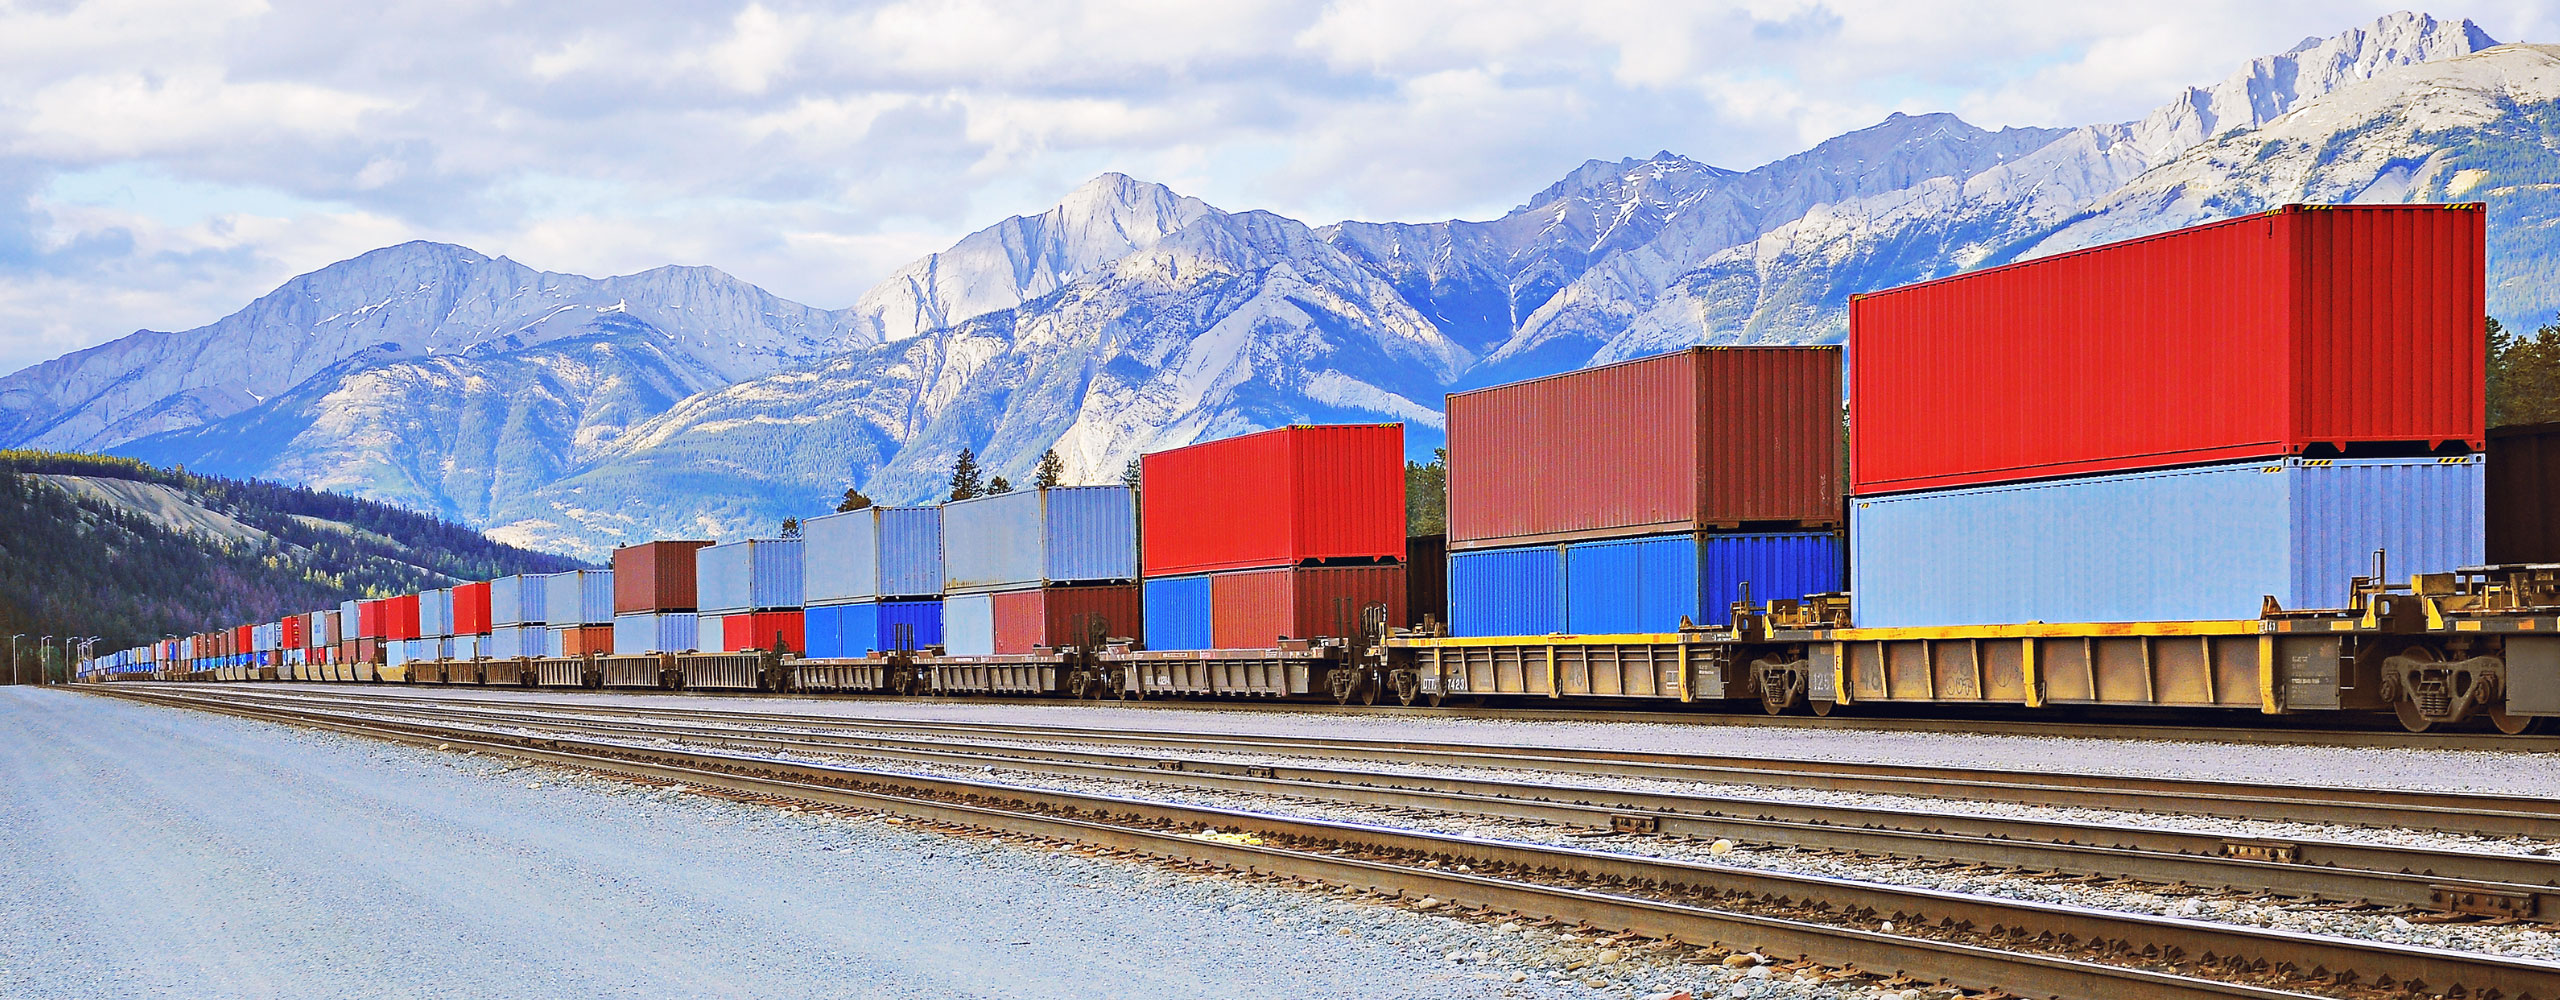 Blue and red Accurate Logistics USA container shipments being transported over rail in front of mountains